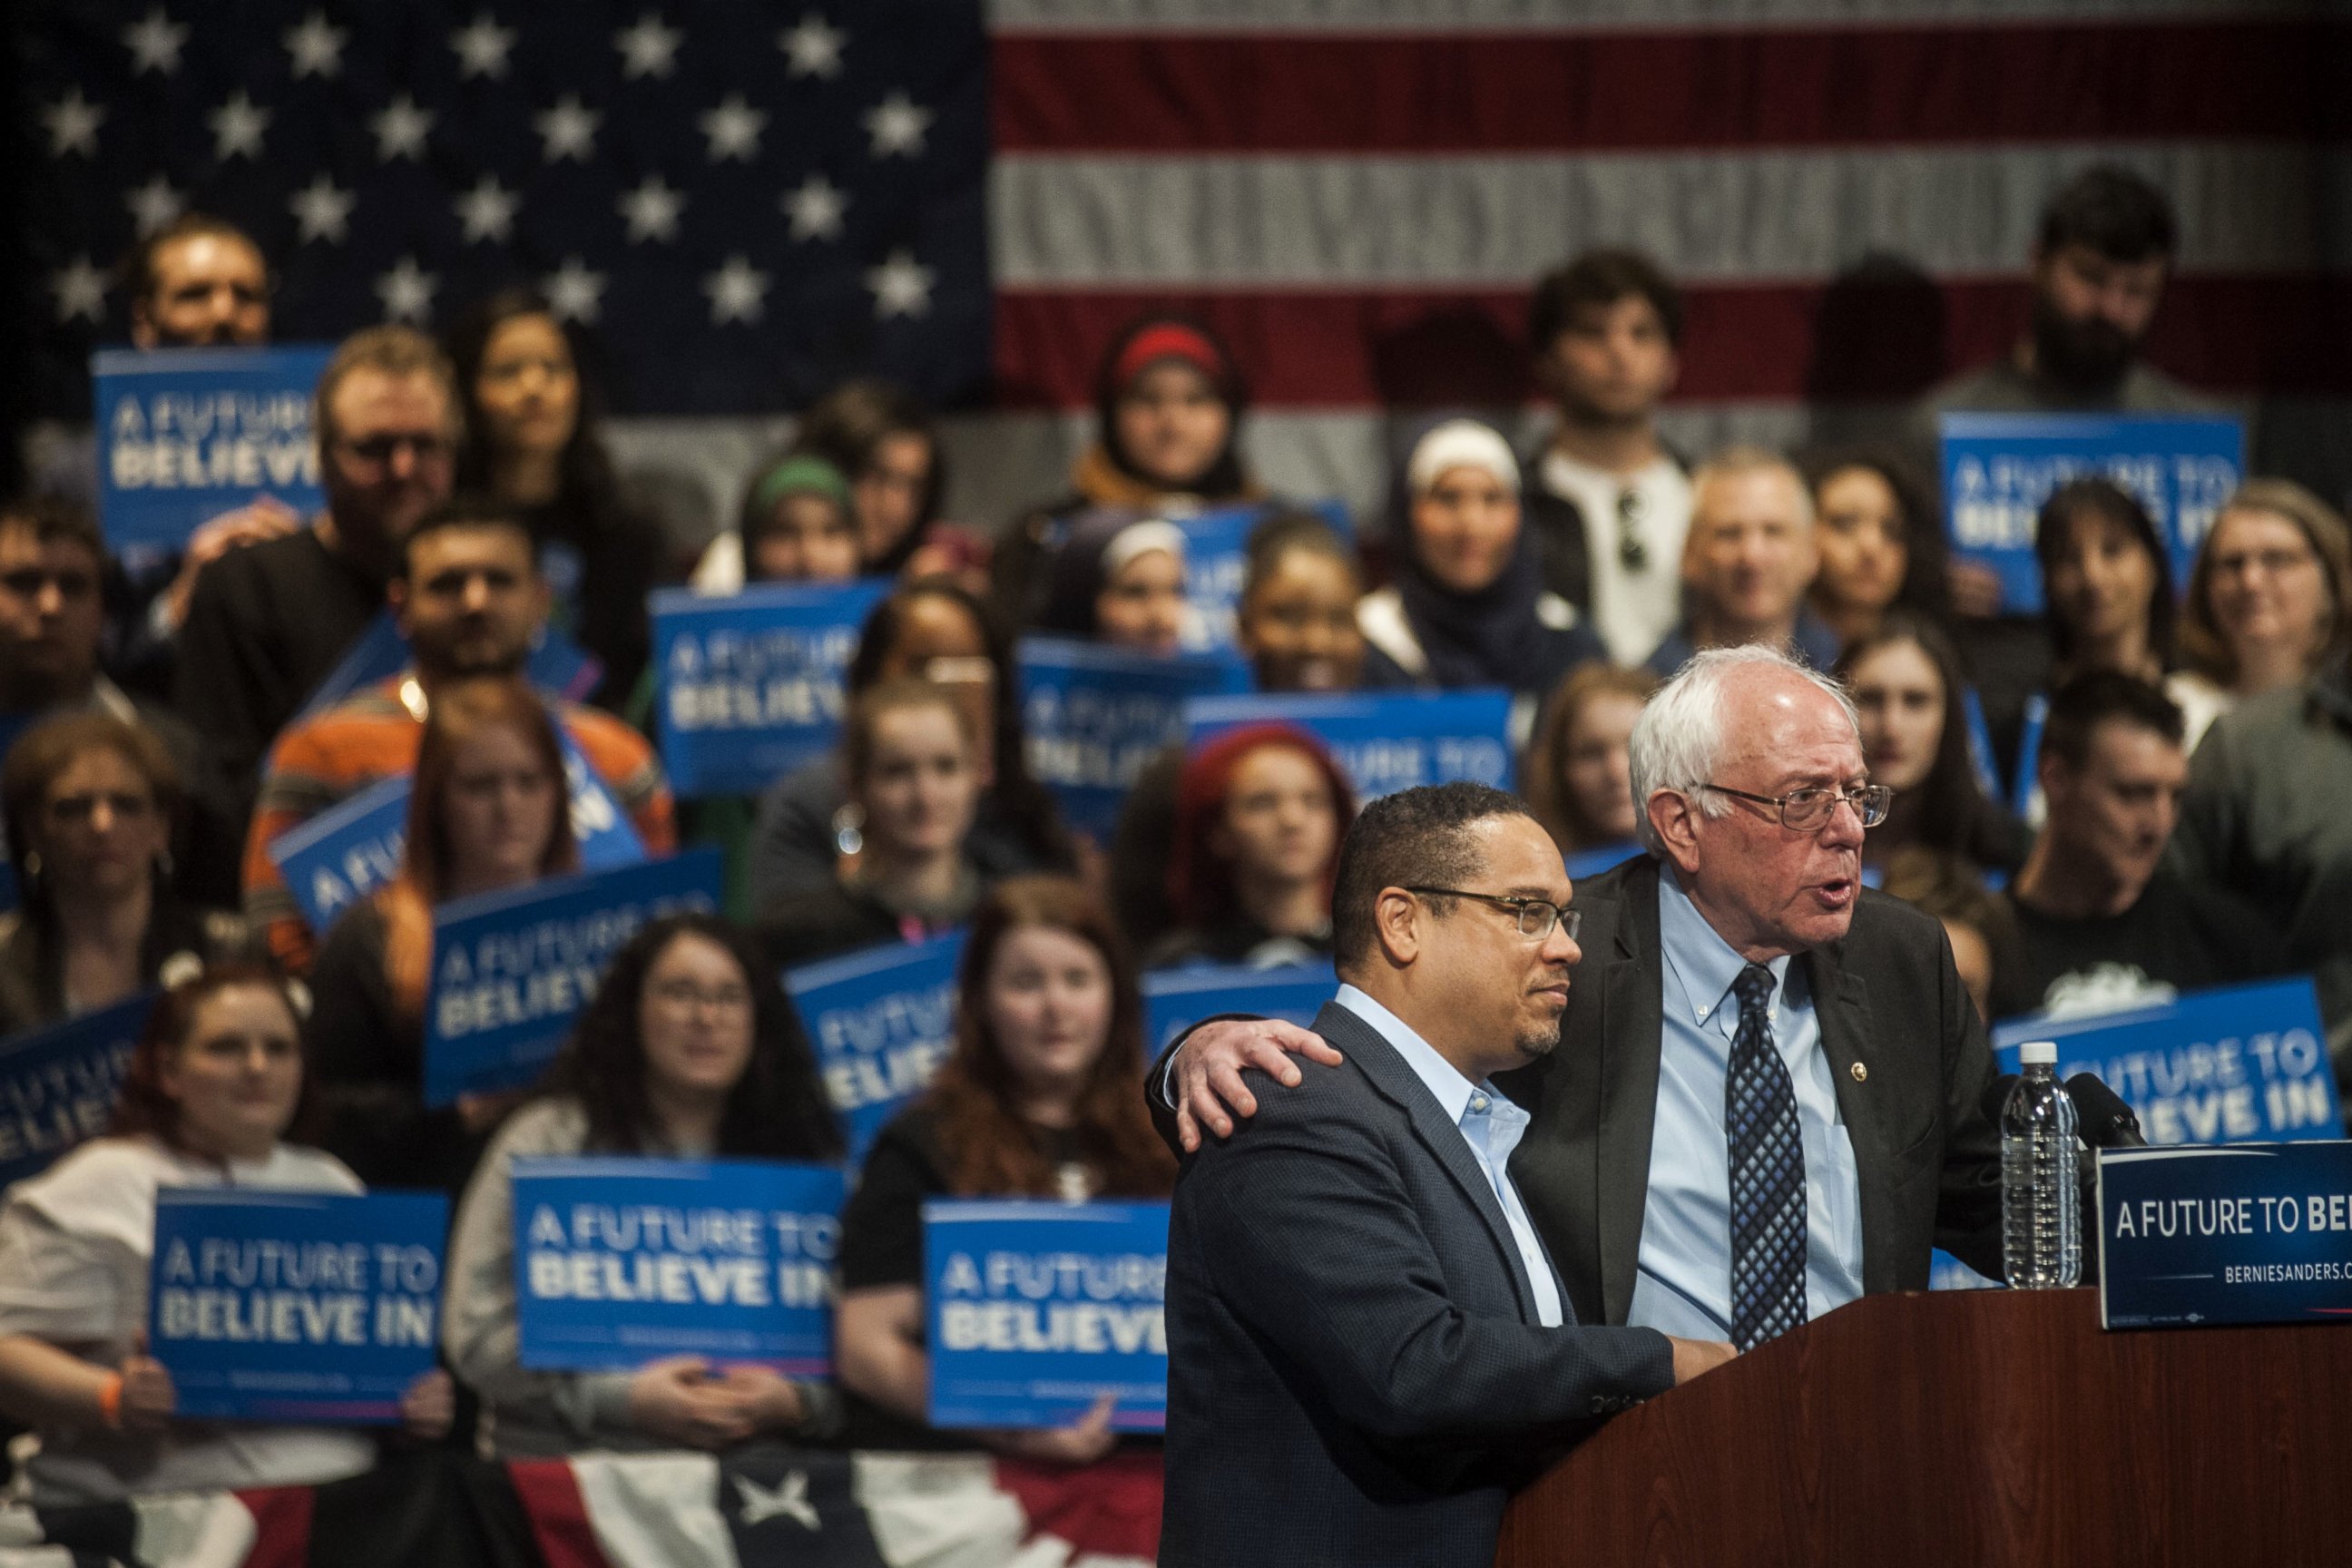 PHOTO: Keith Ellison and Bernie Sanders speak during a campaign event in Dearborn, Michigan, March 7, 2016. 